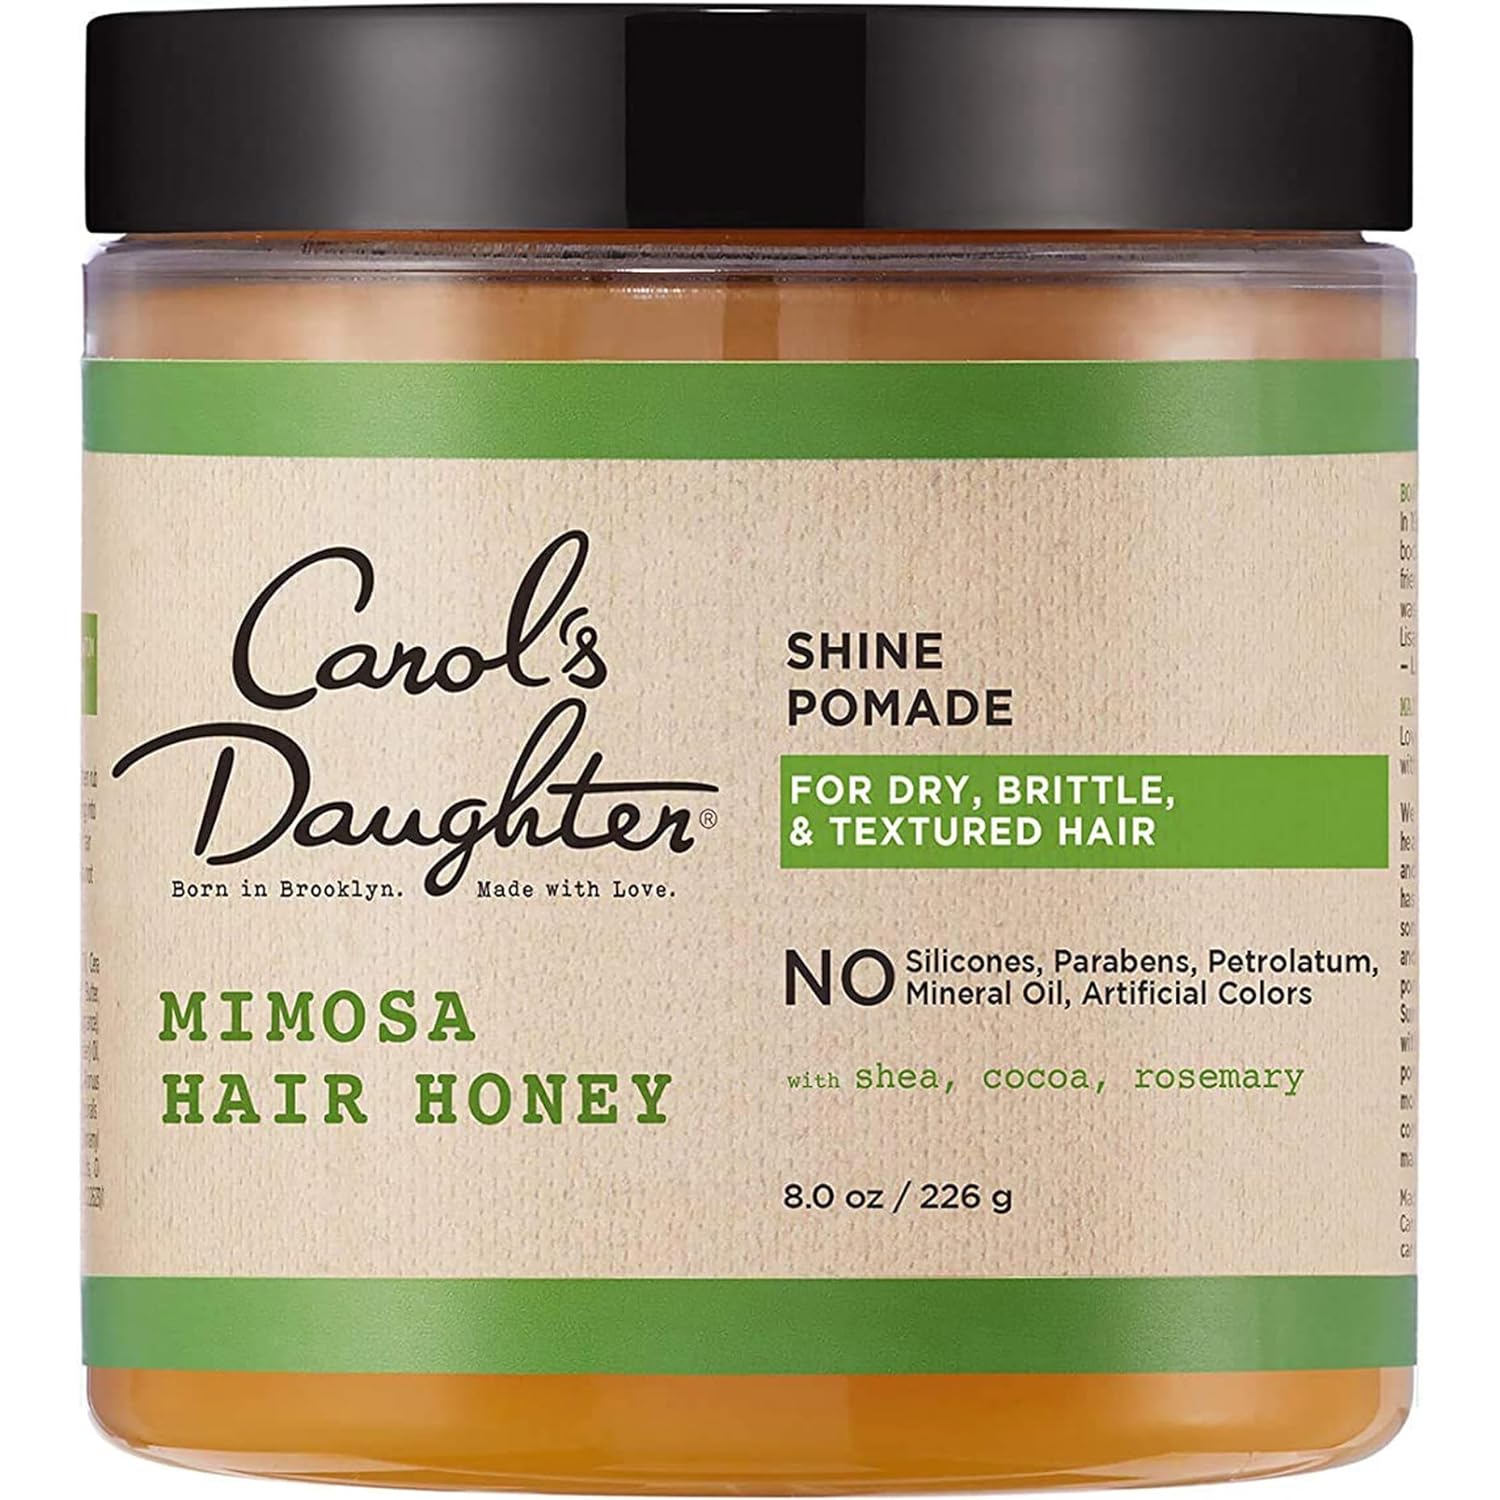 Carol’s Daughter Mimosa Hair Honey Shine Pomade for Textured and Curly Hair